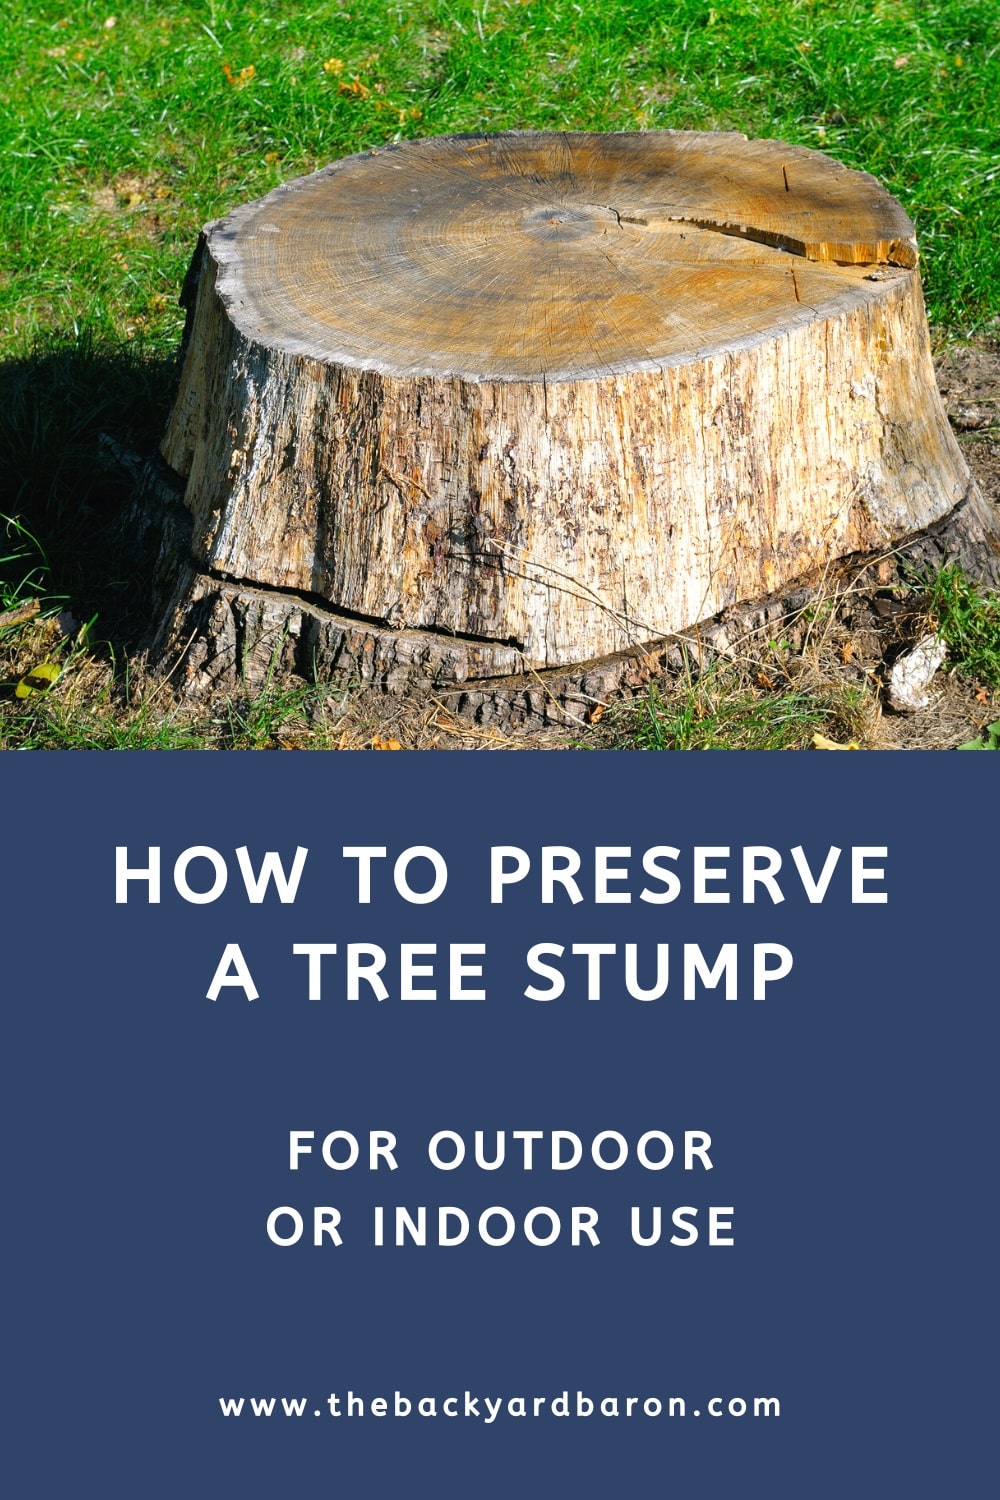 Preserving a tree stump for outdoor or indoor use